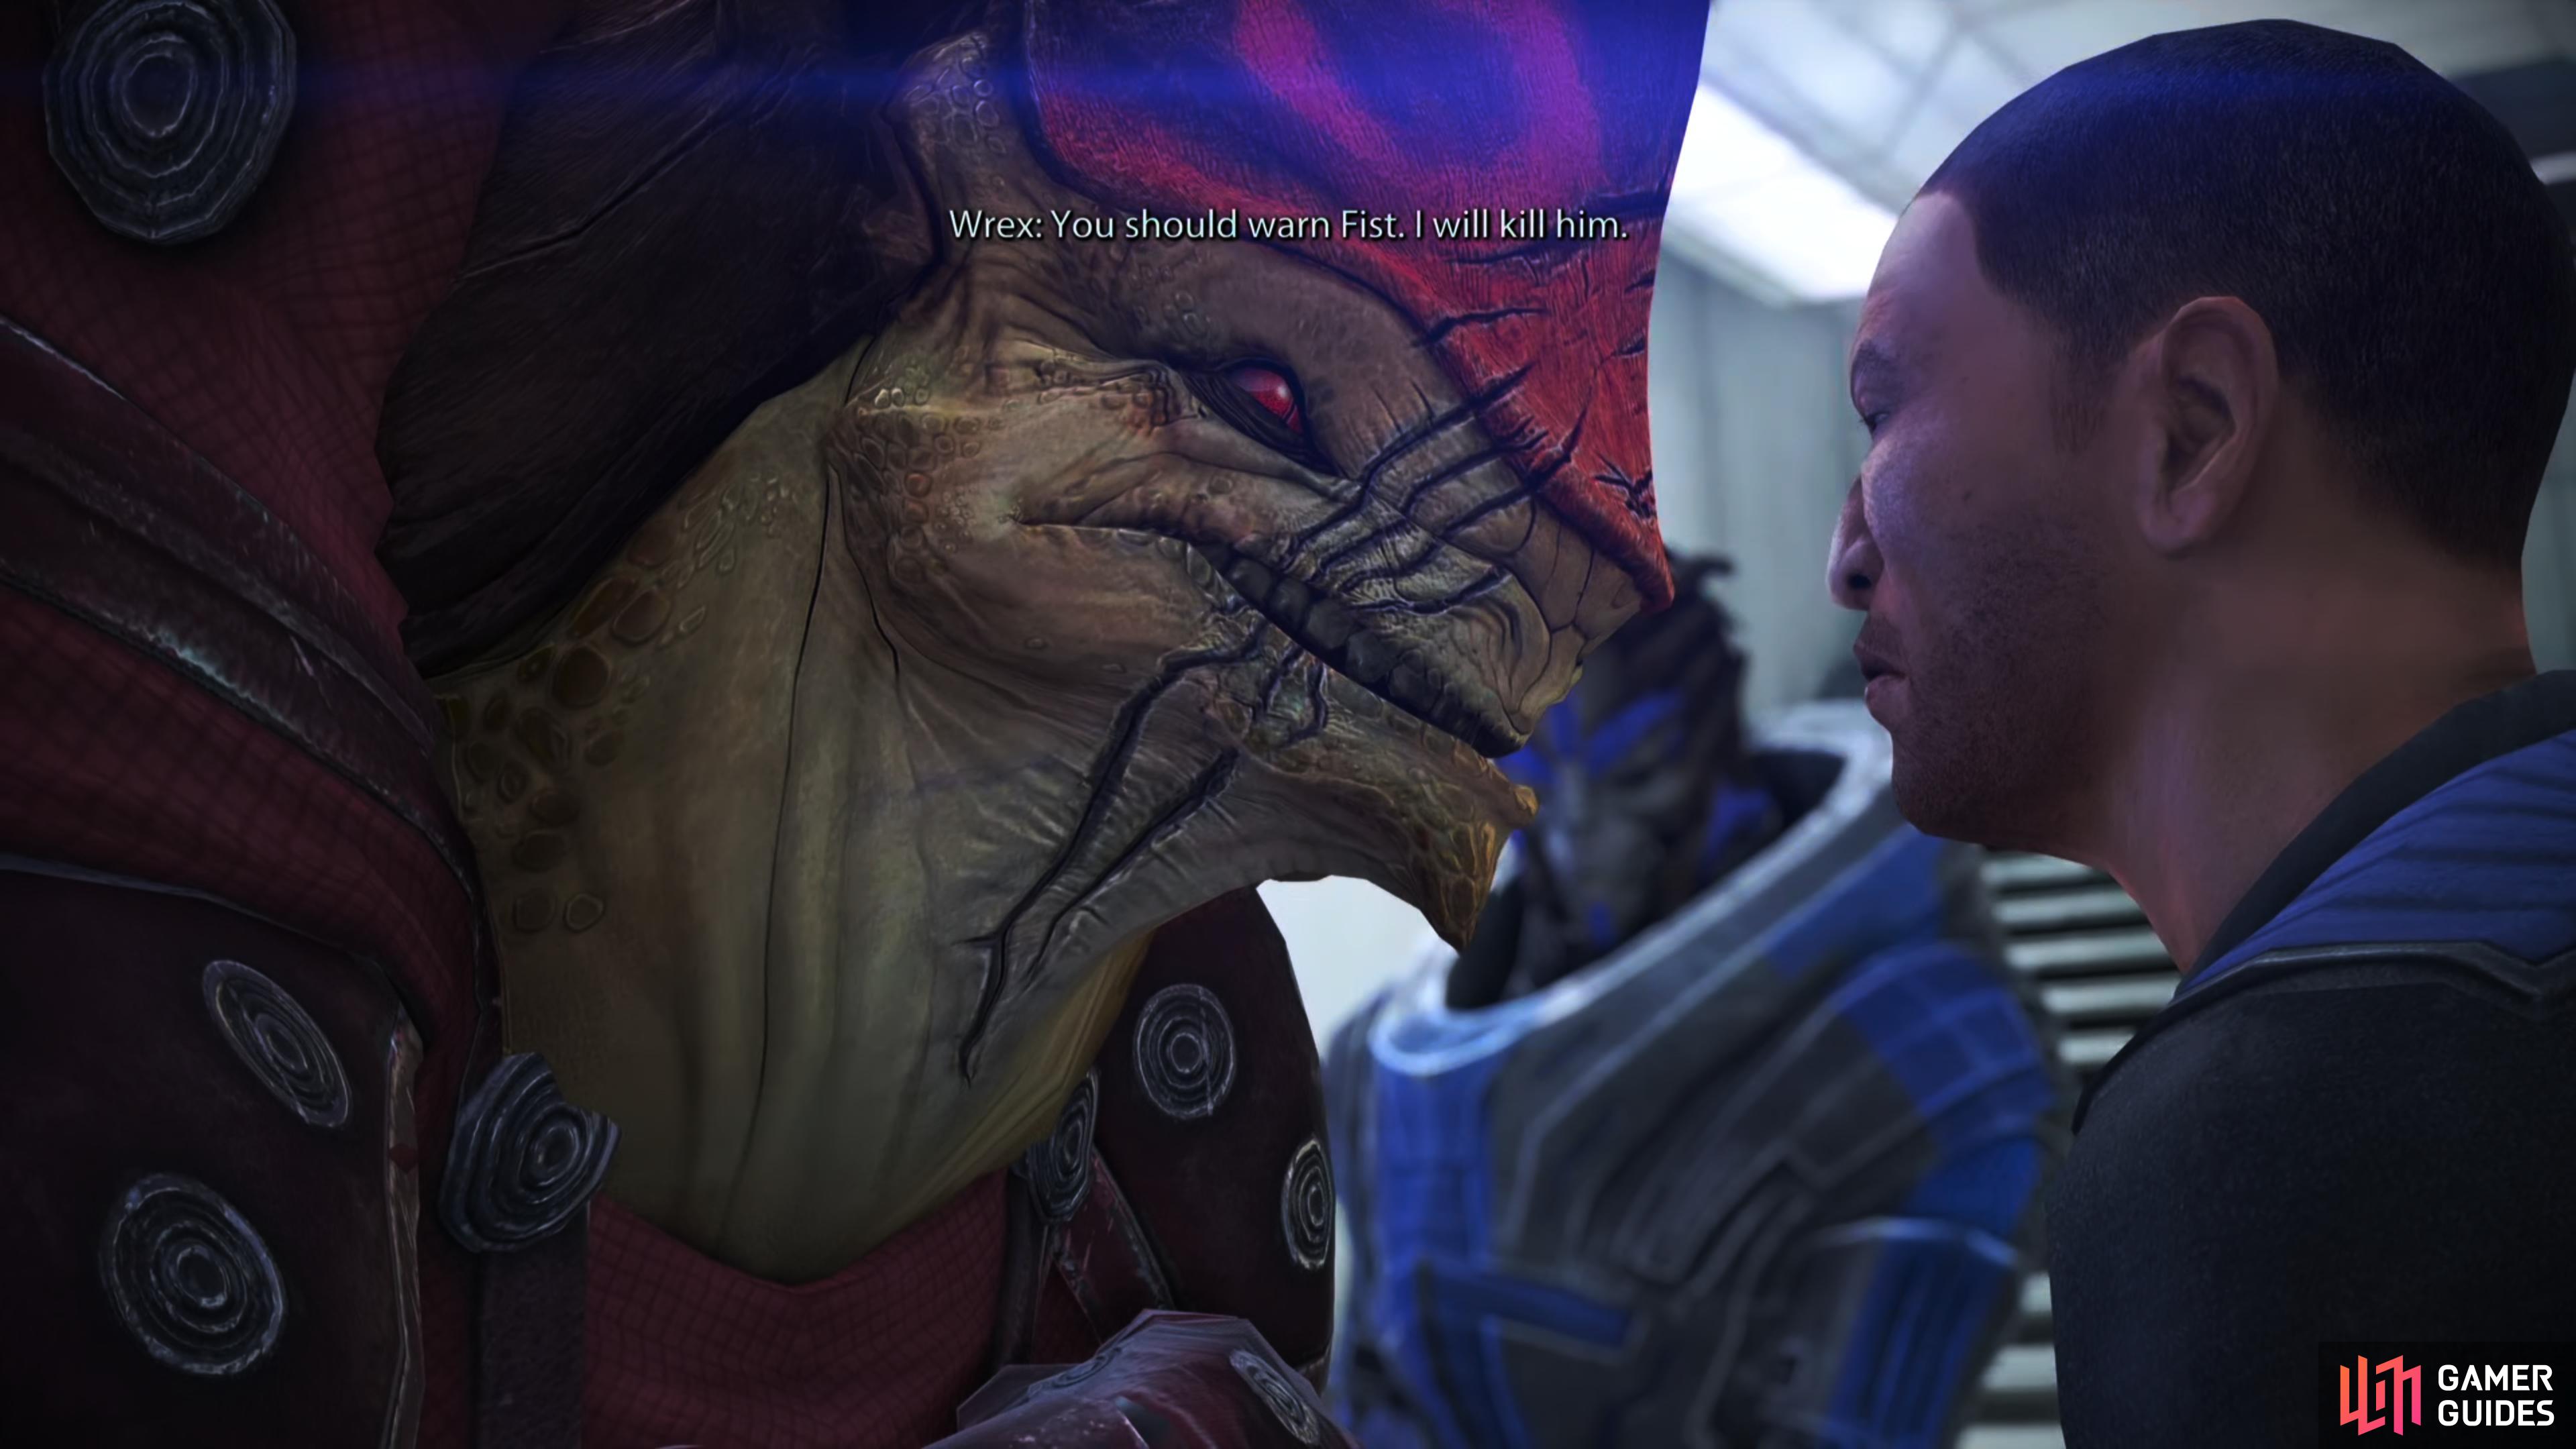 After learning about Wrex from Barla Von or Garrus, you'll find him doubling down on his threats at C-Sec Academy.